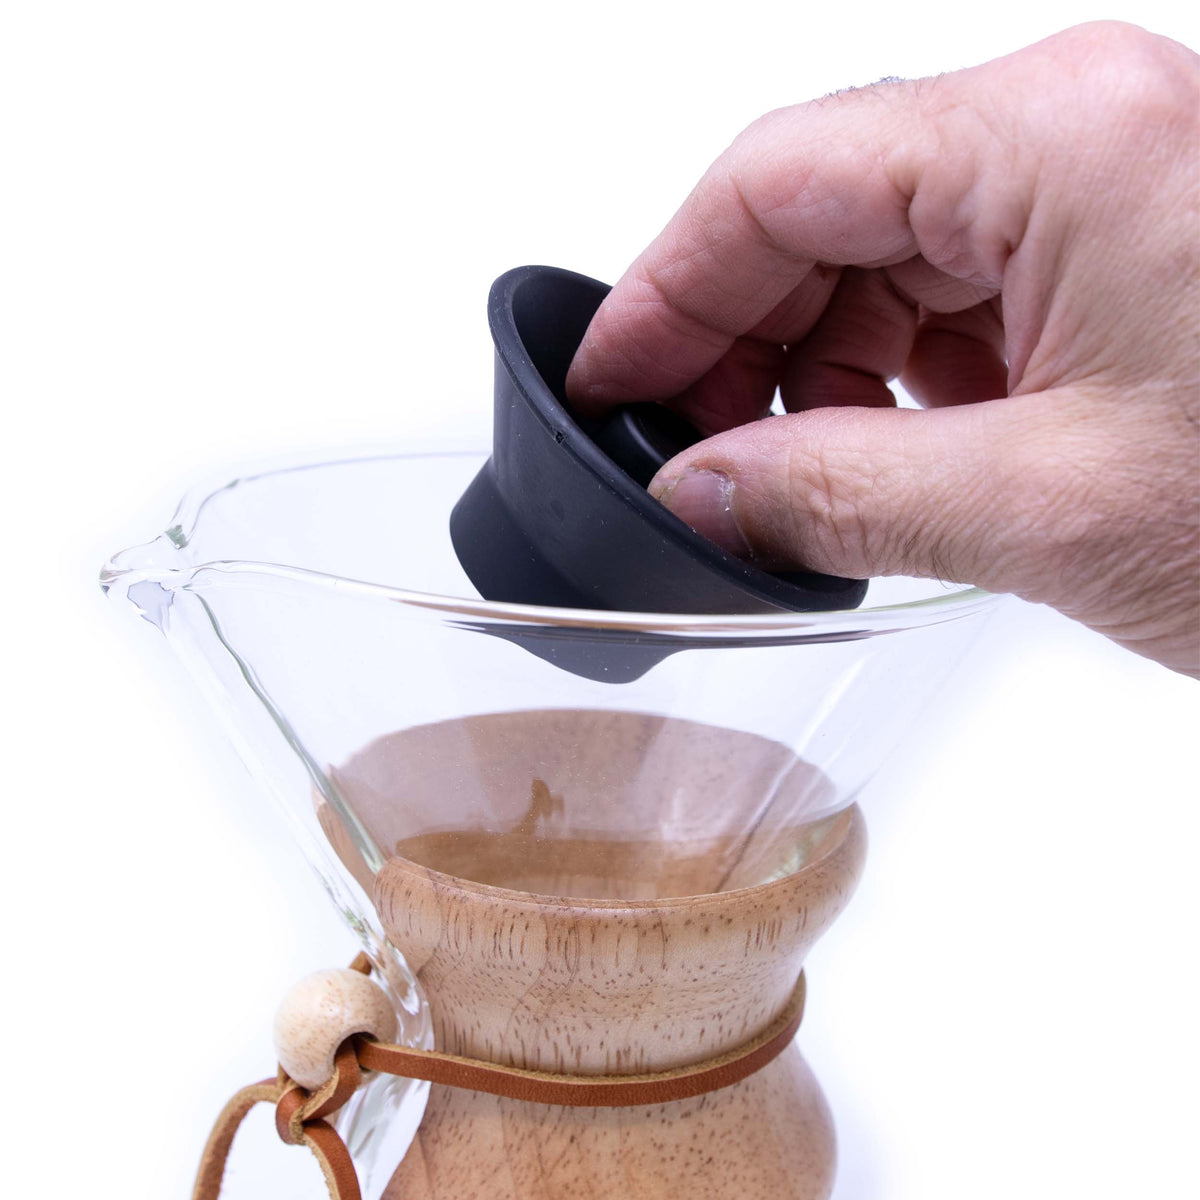 Chemex Pour Over Coffeemaker Glass - Stock Culinary Goods